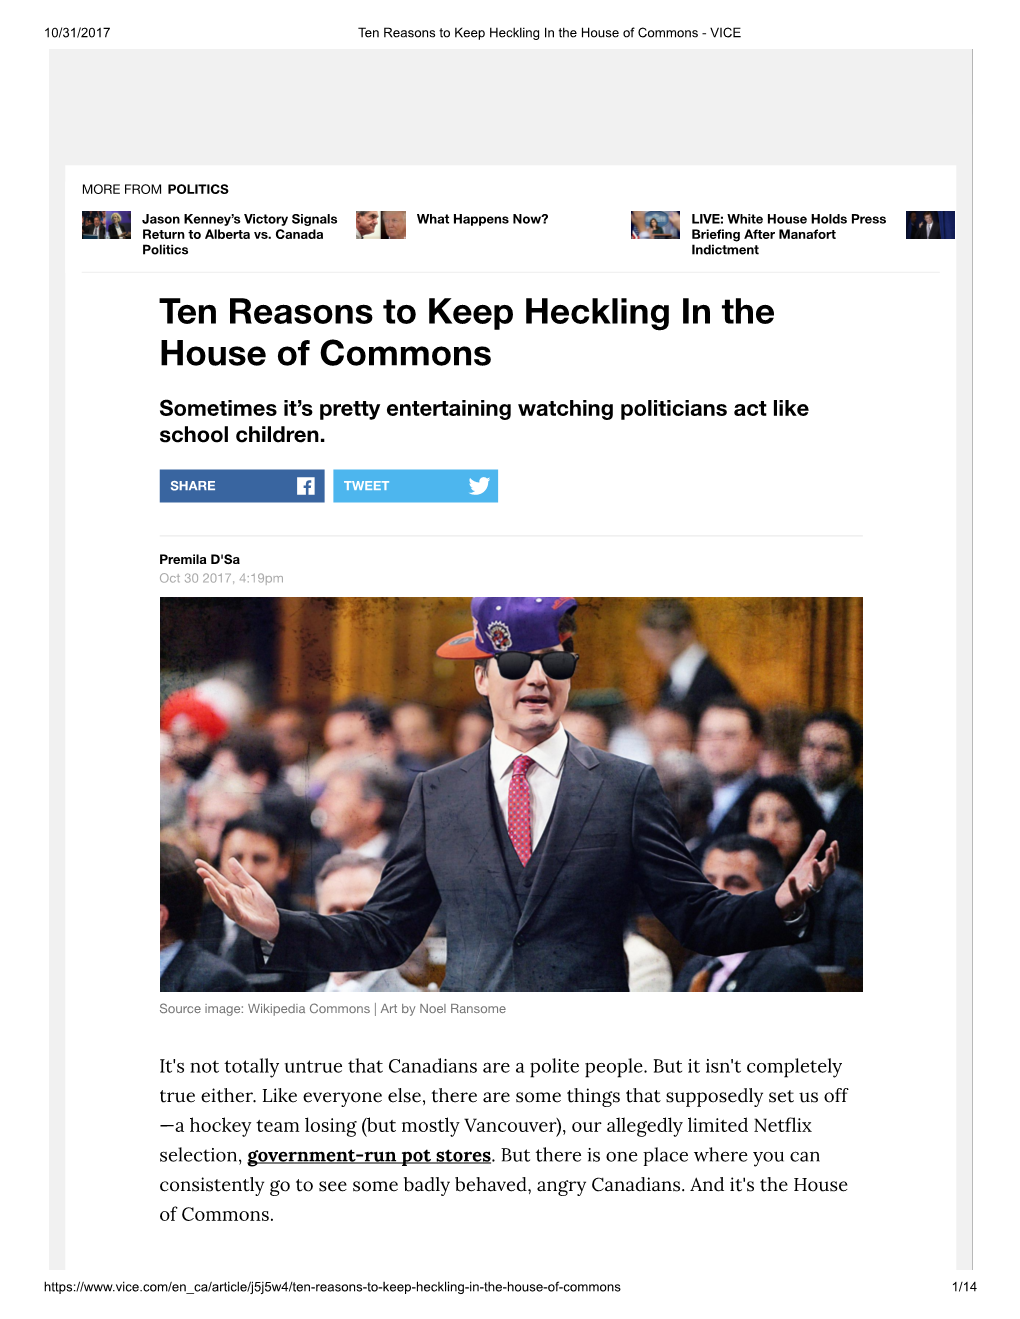 Ten Reasons to Keep Heckling in the House of Commons - VICE